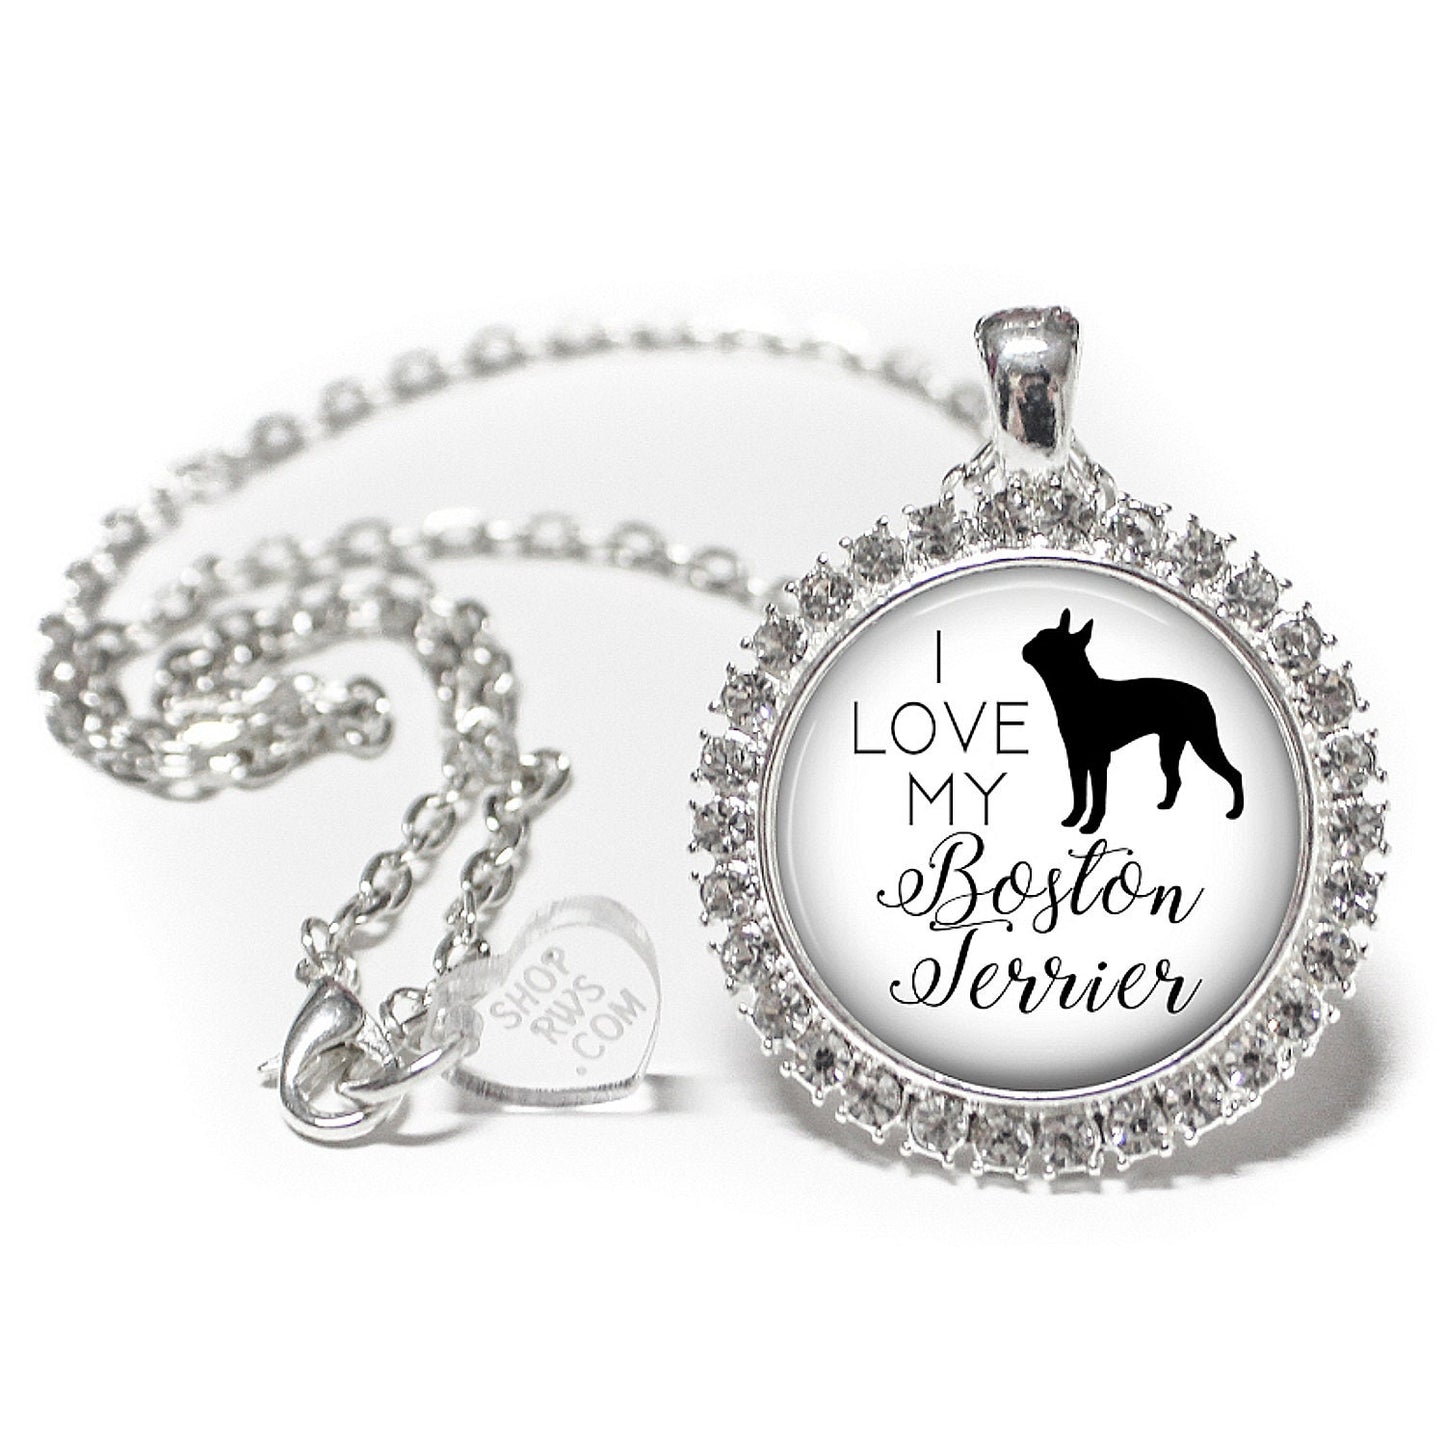 I Love My Boston Terrier Dog Necklace